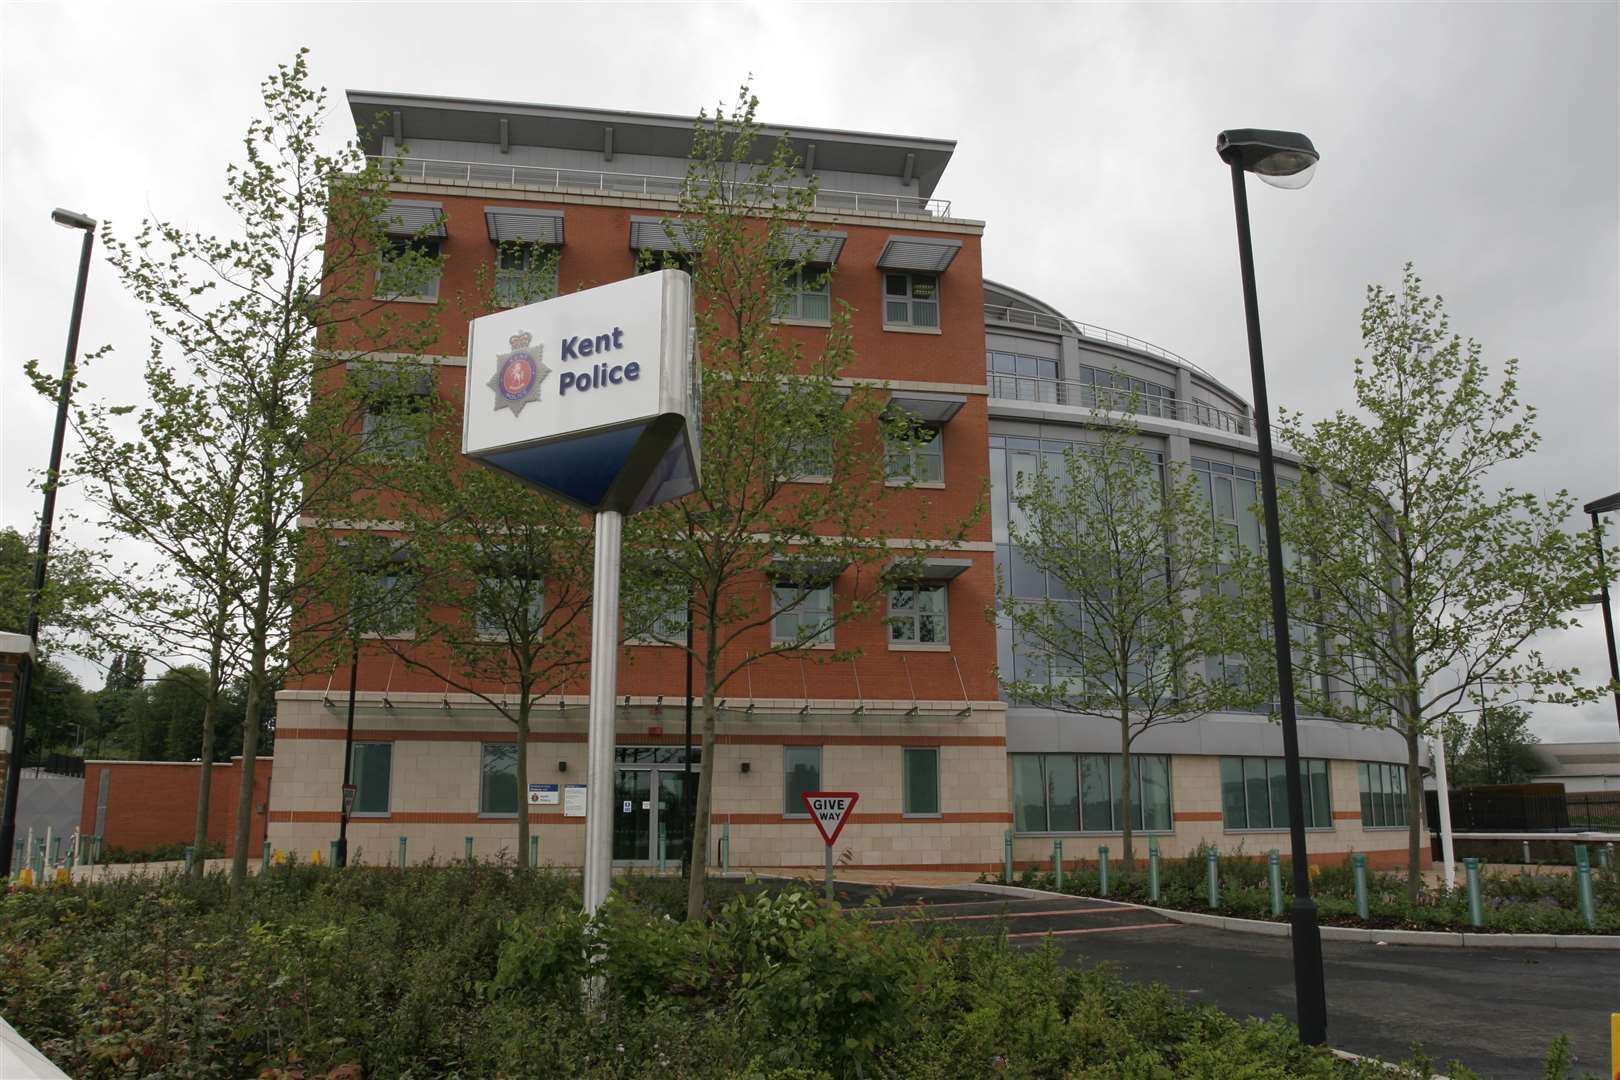 The incident happened at Medway Police Station